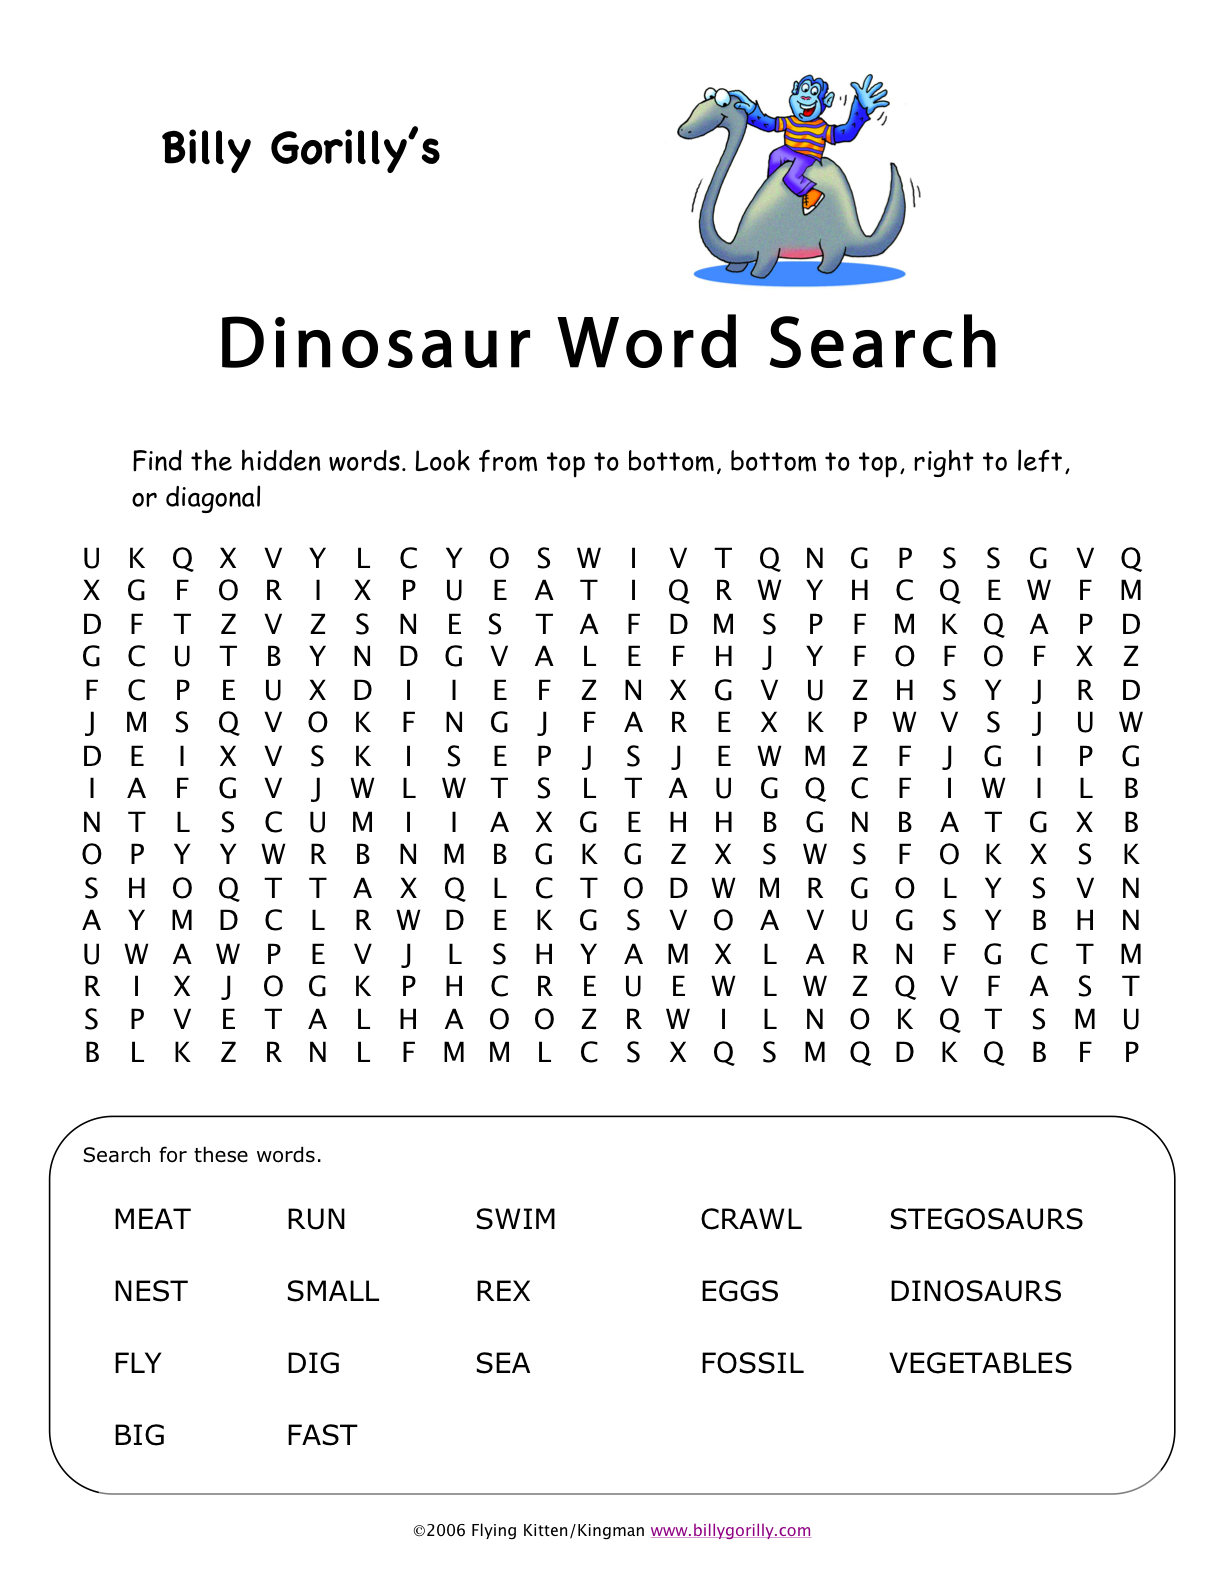 click to download Dinosaurs word search